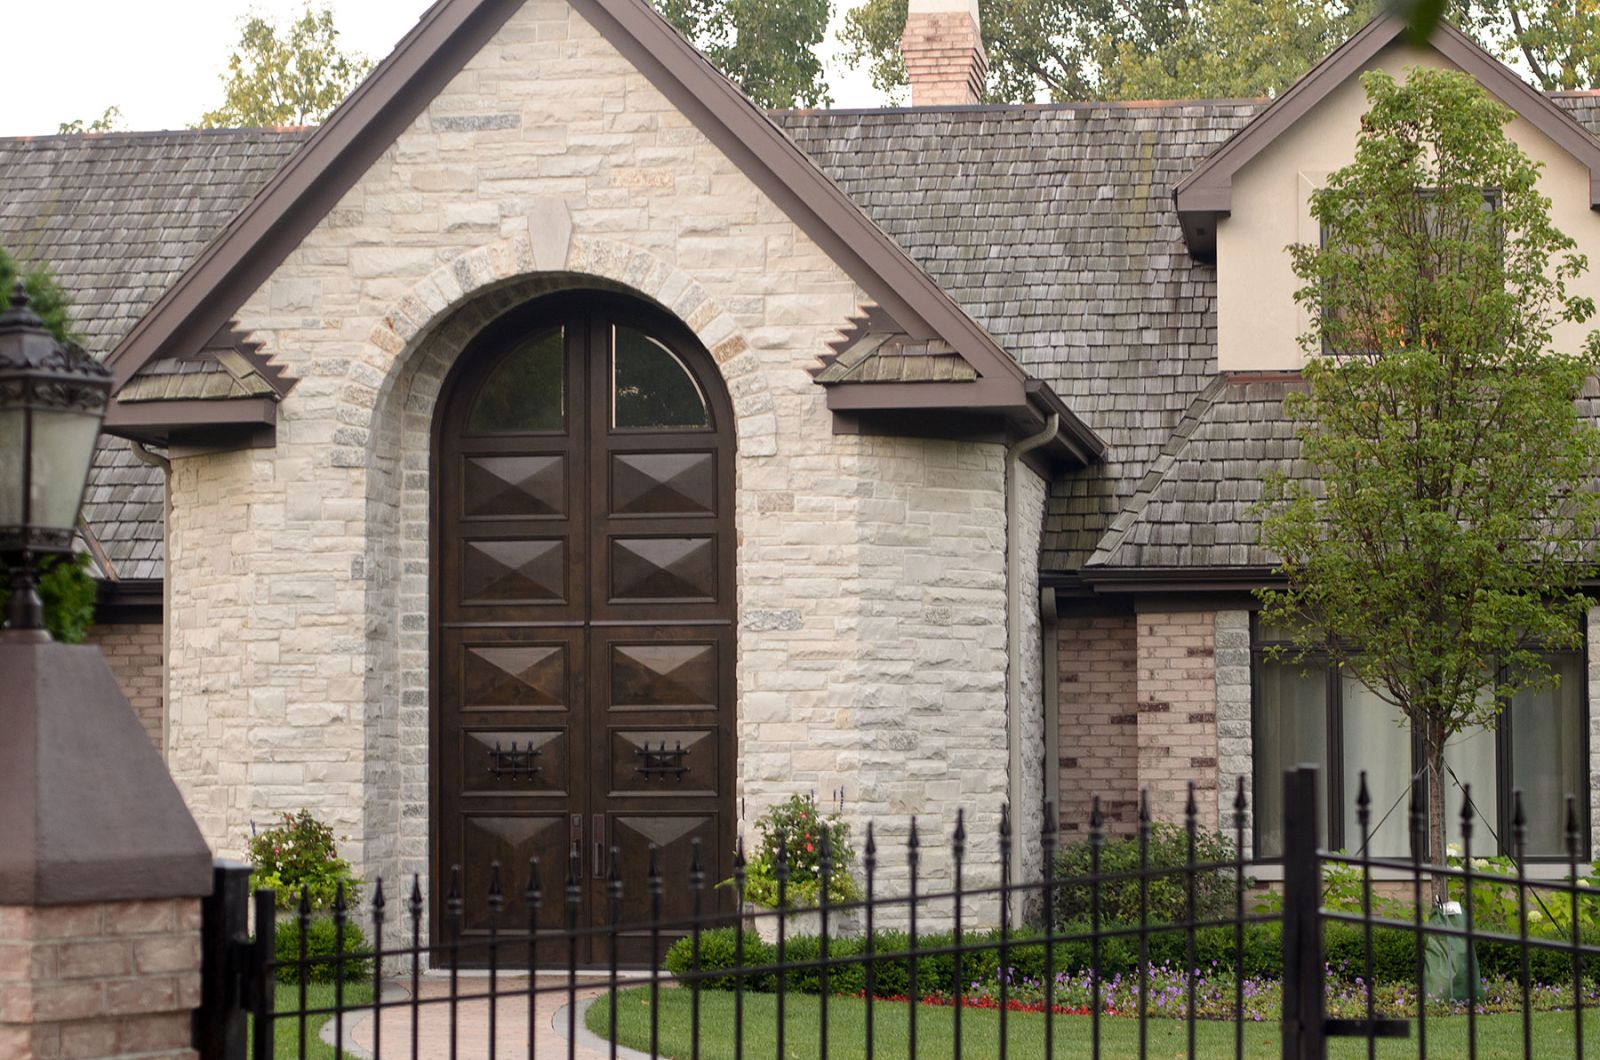 How To Build An Iron Gate For Your Dream House